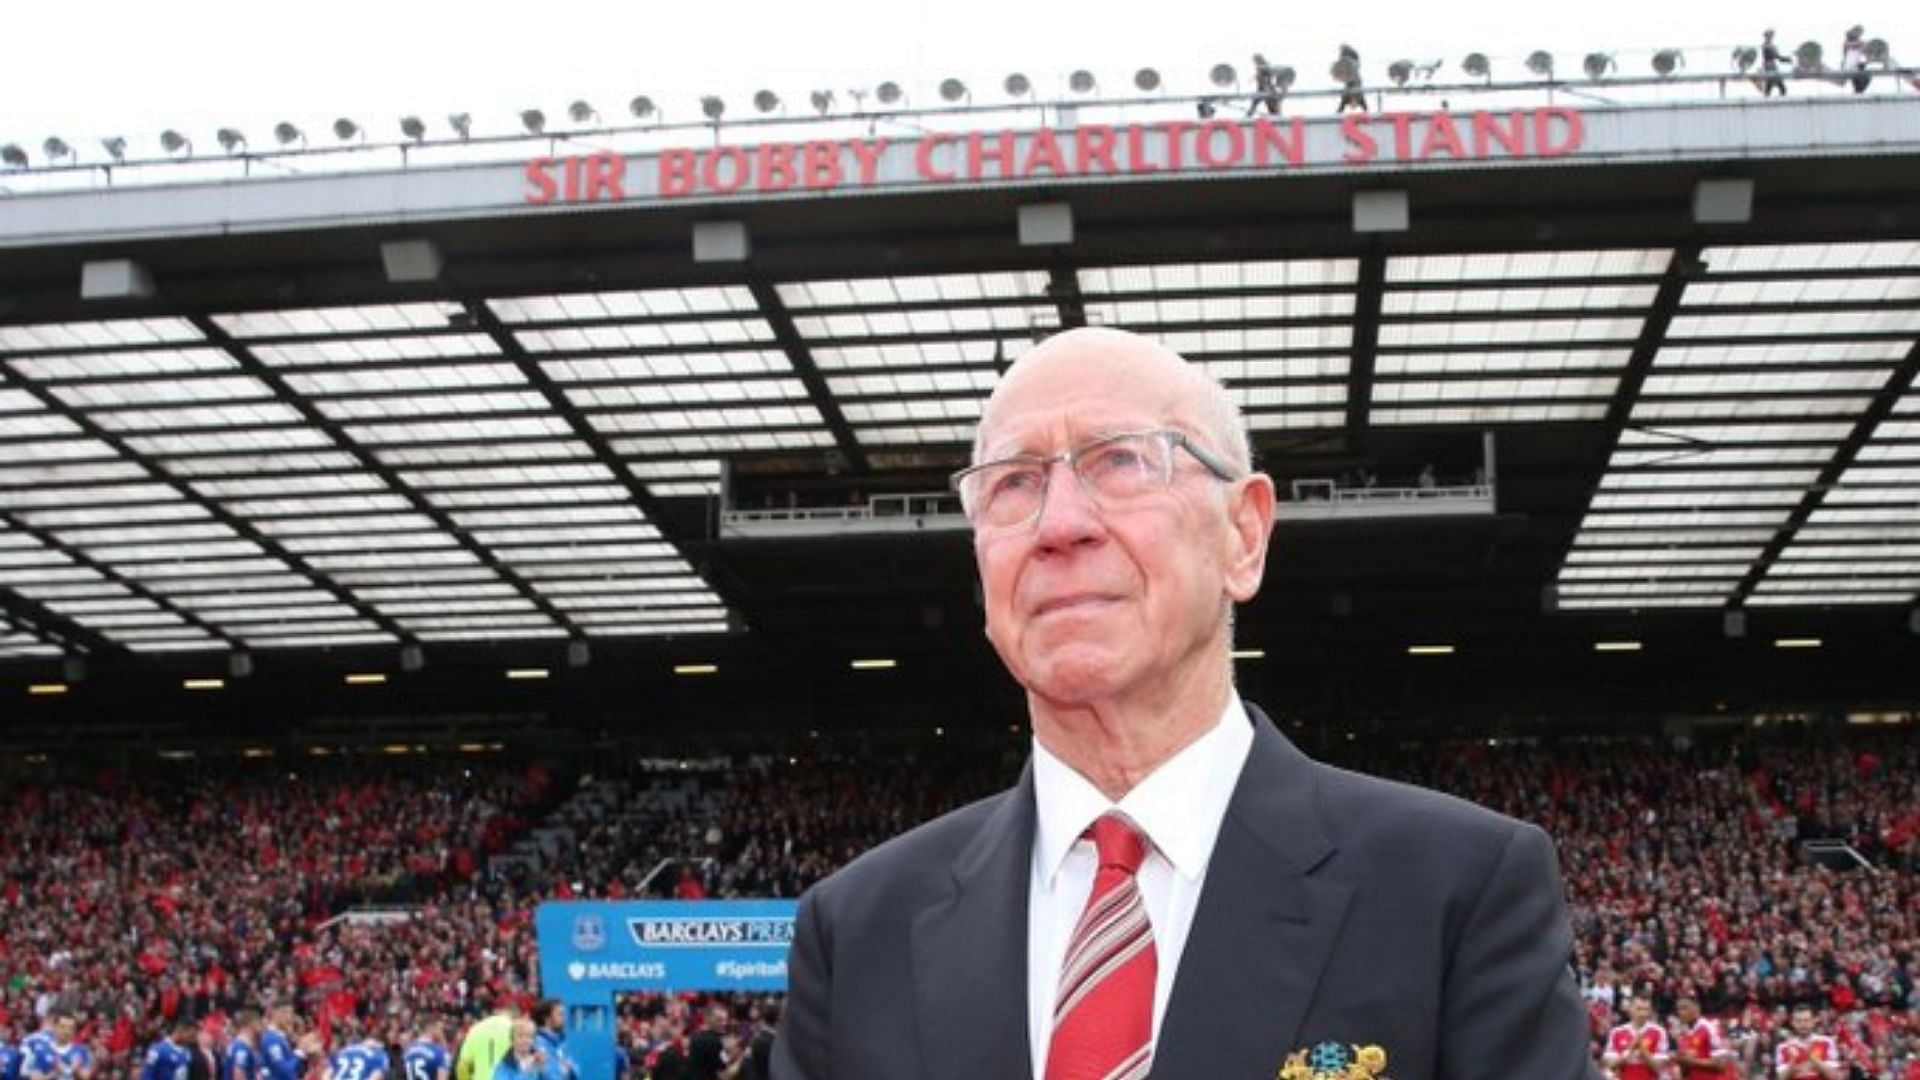 Sir Bobby Charlton in 2016, in front of the stand named after him